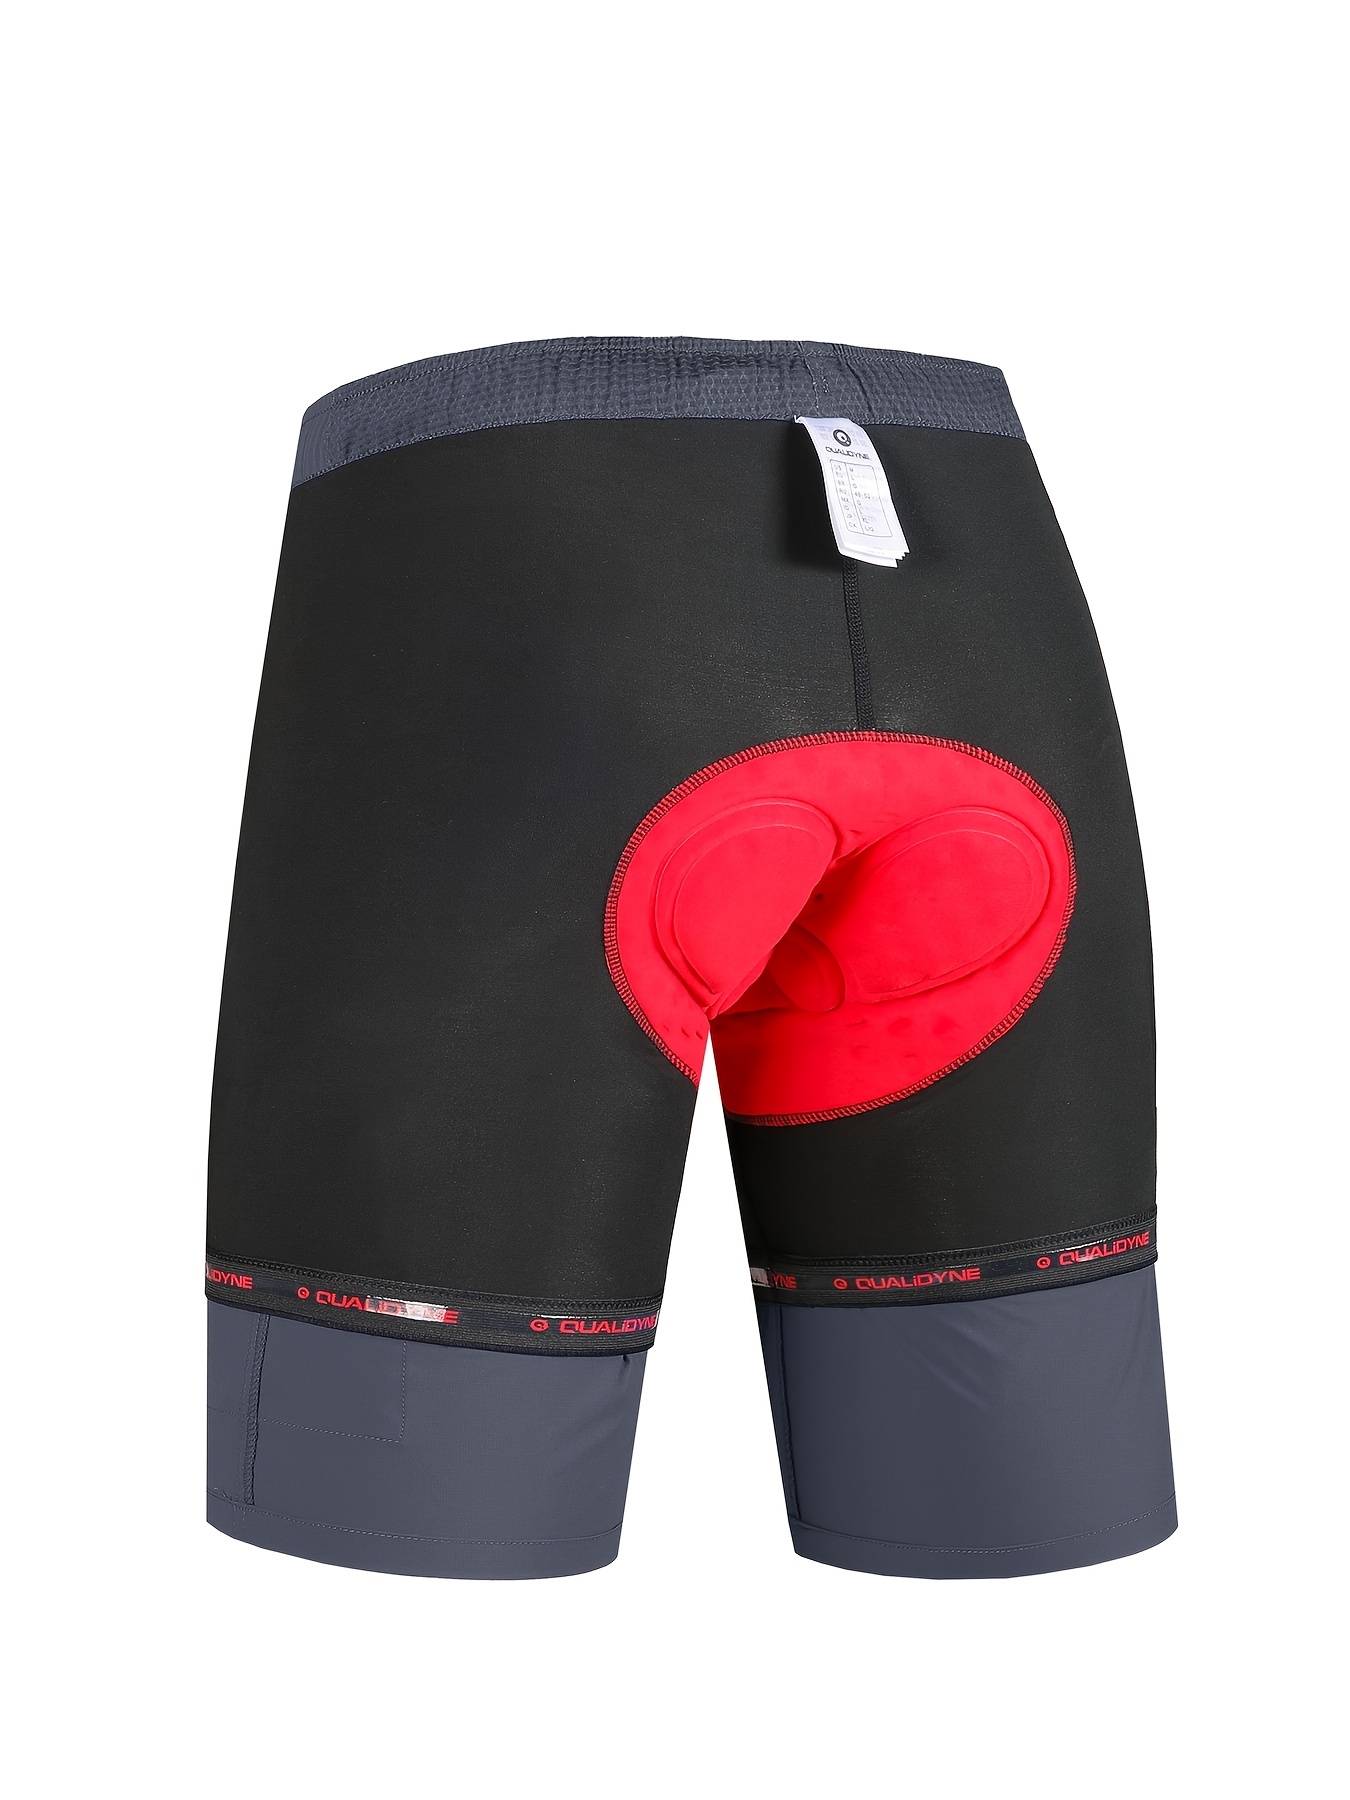 Rahhint Bike Shorts Men 4D Padded Cycling Shorts Biking Bicycle Shorts with  Pockets Breathable Lightweight Quick-Dry, Upgrade (Black), Medium :  : Clothing, Shoes & Accessories